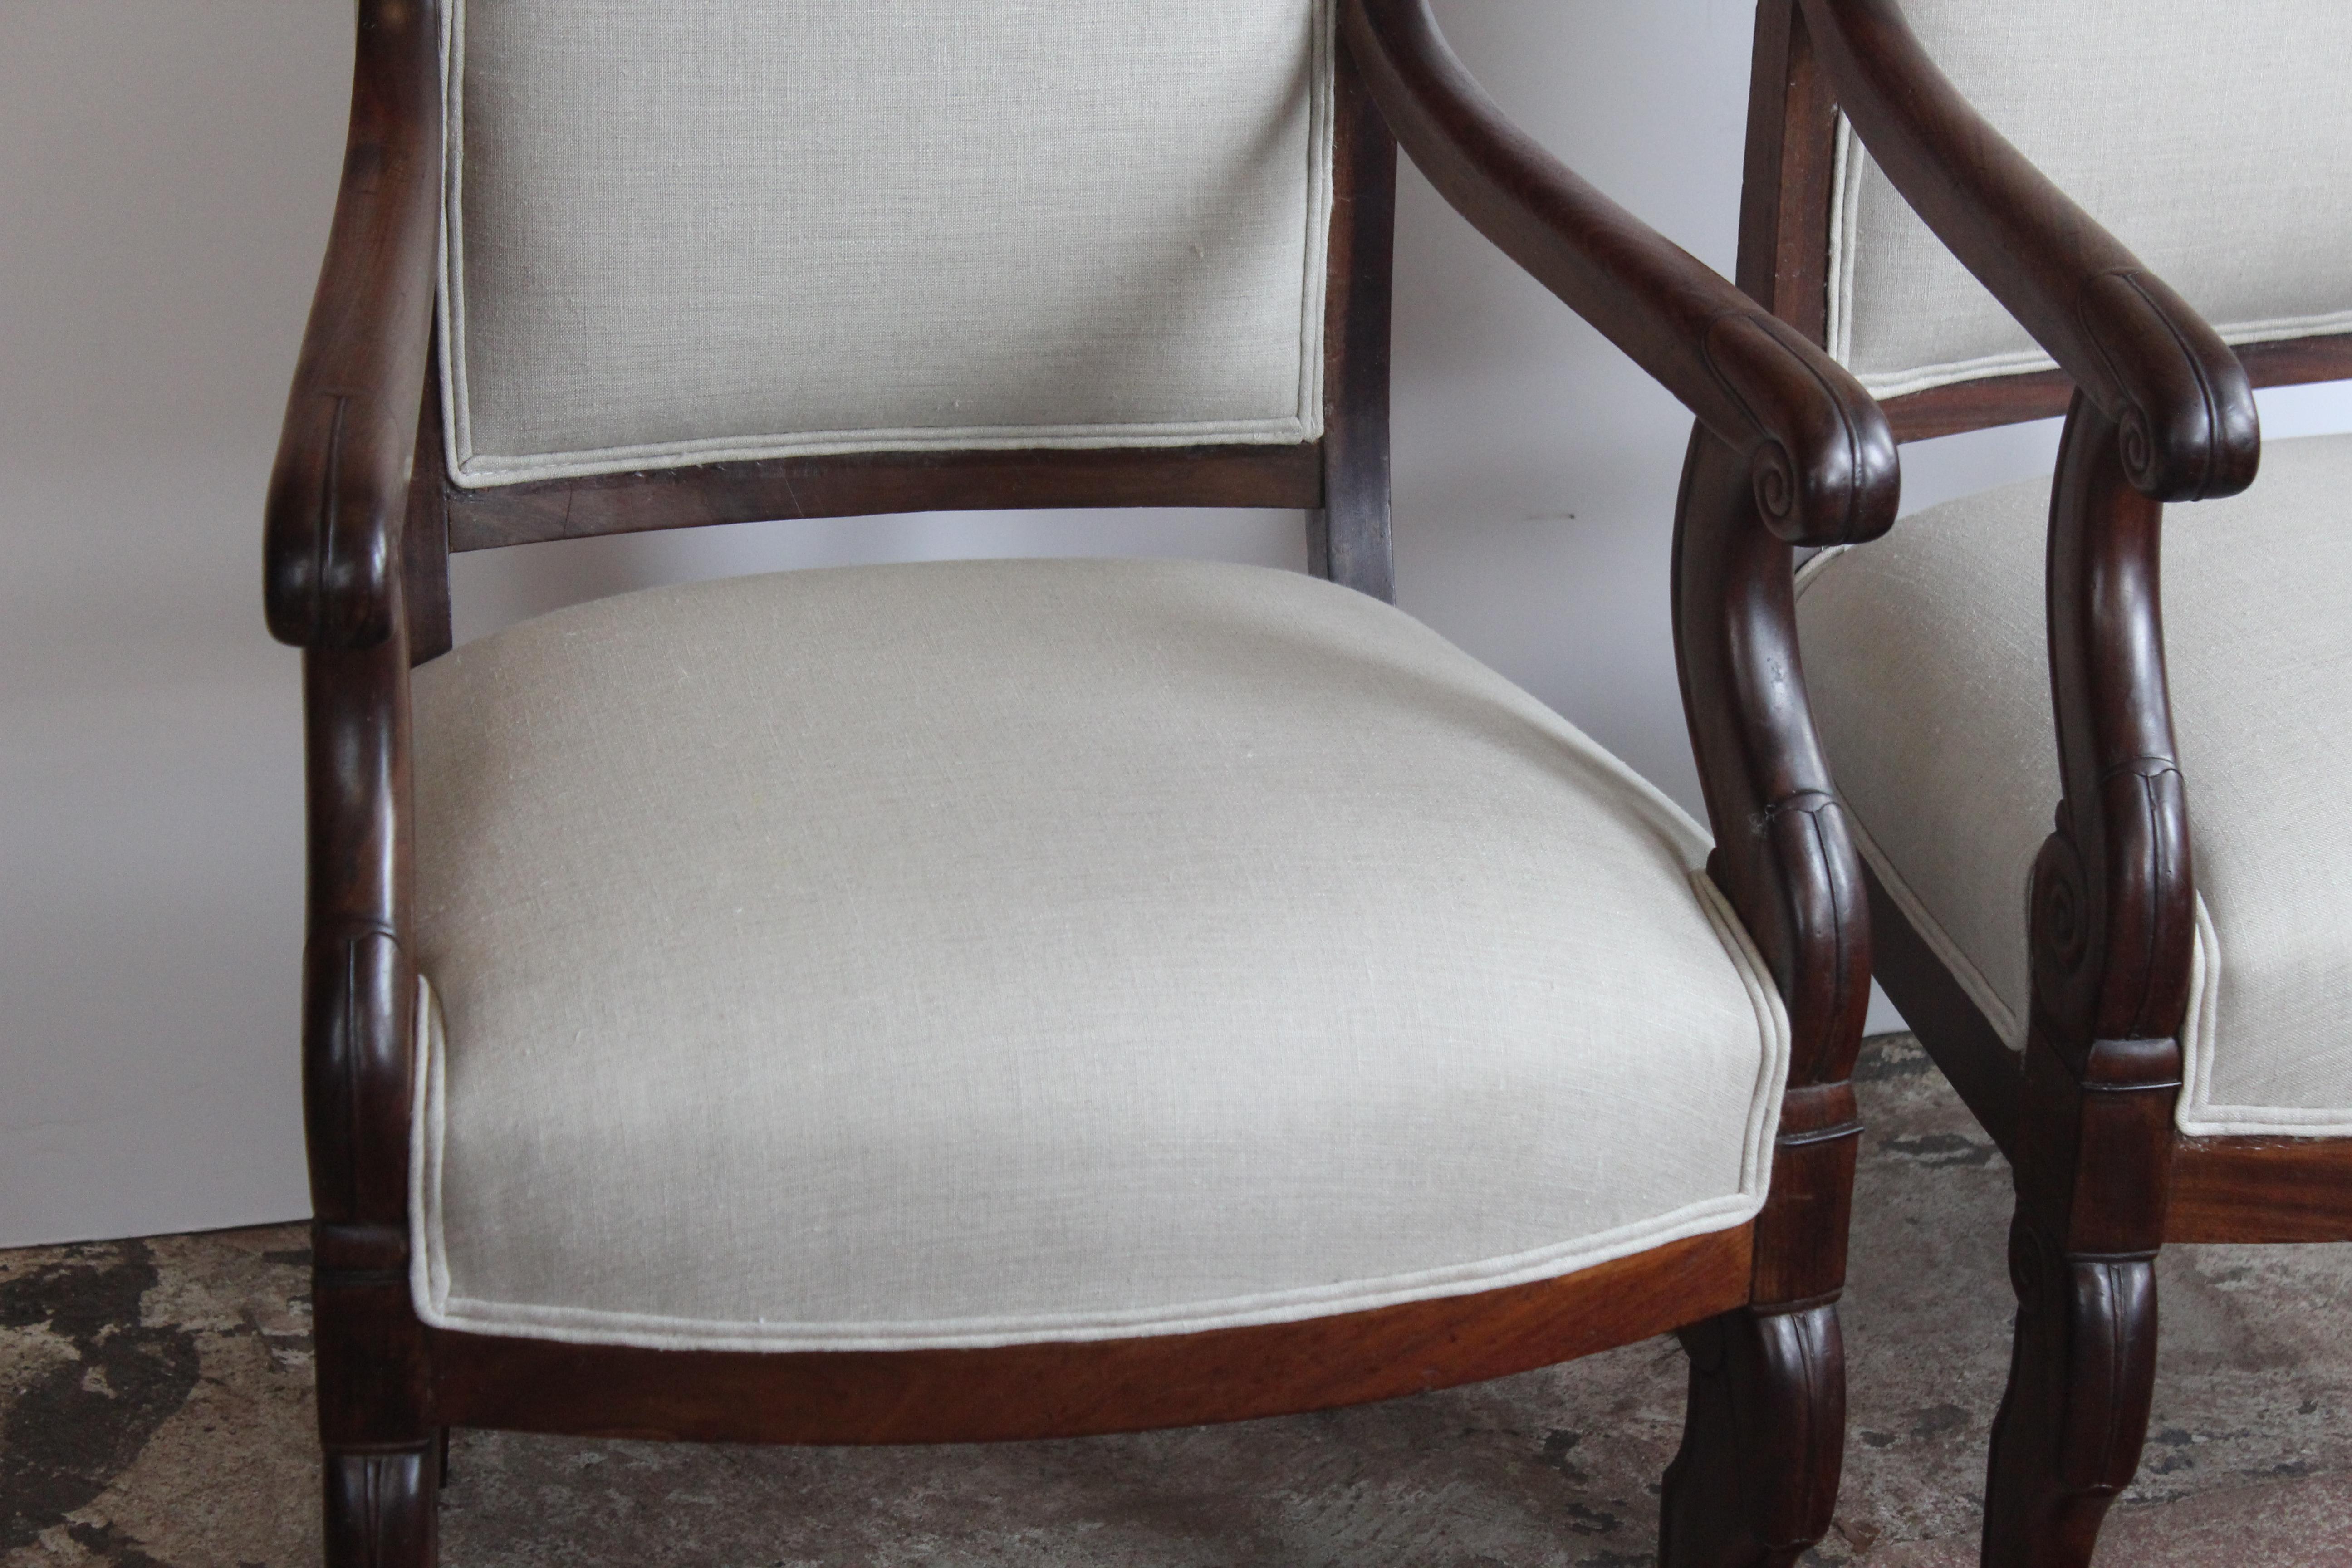 Pair of 19th century French armchairs. Upholstered in linen.